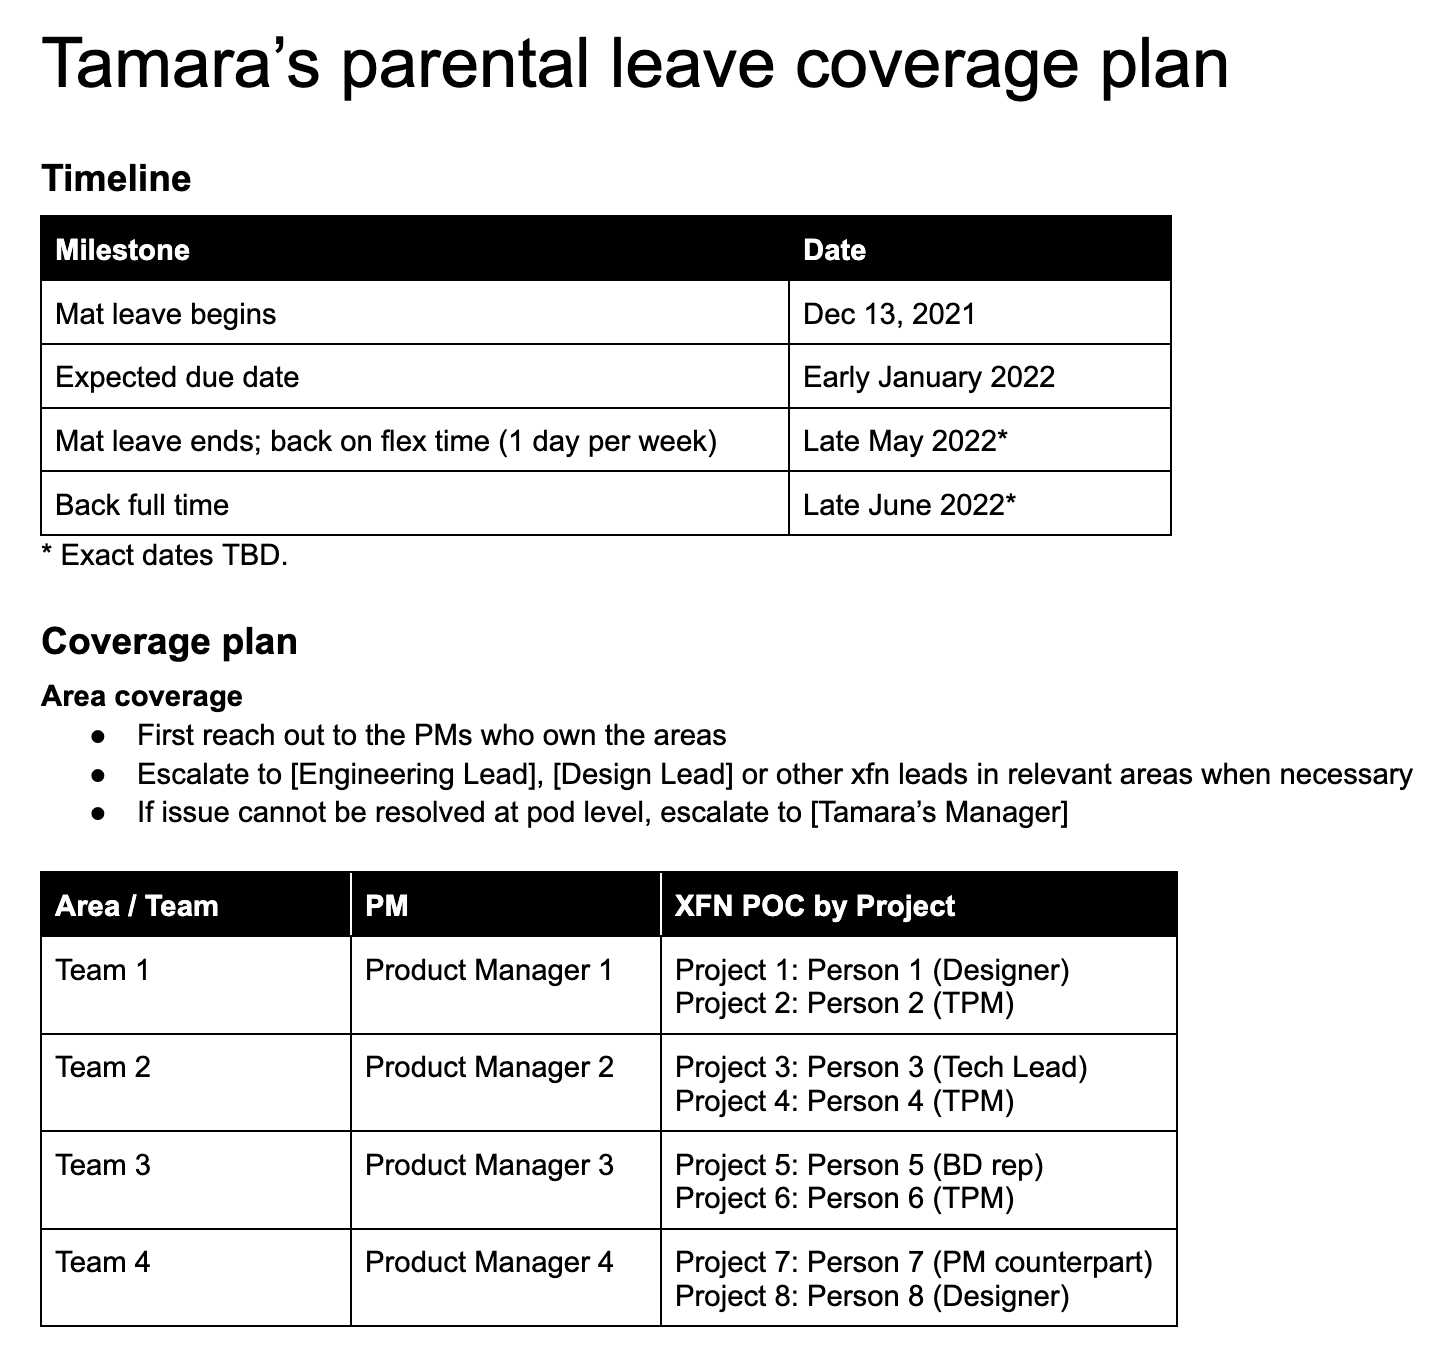 How to create an exceptional coverage plan for your parental leave